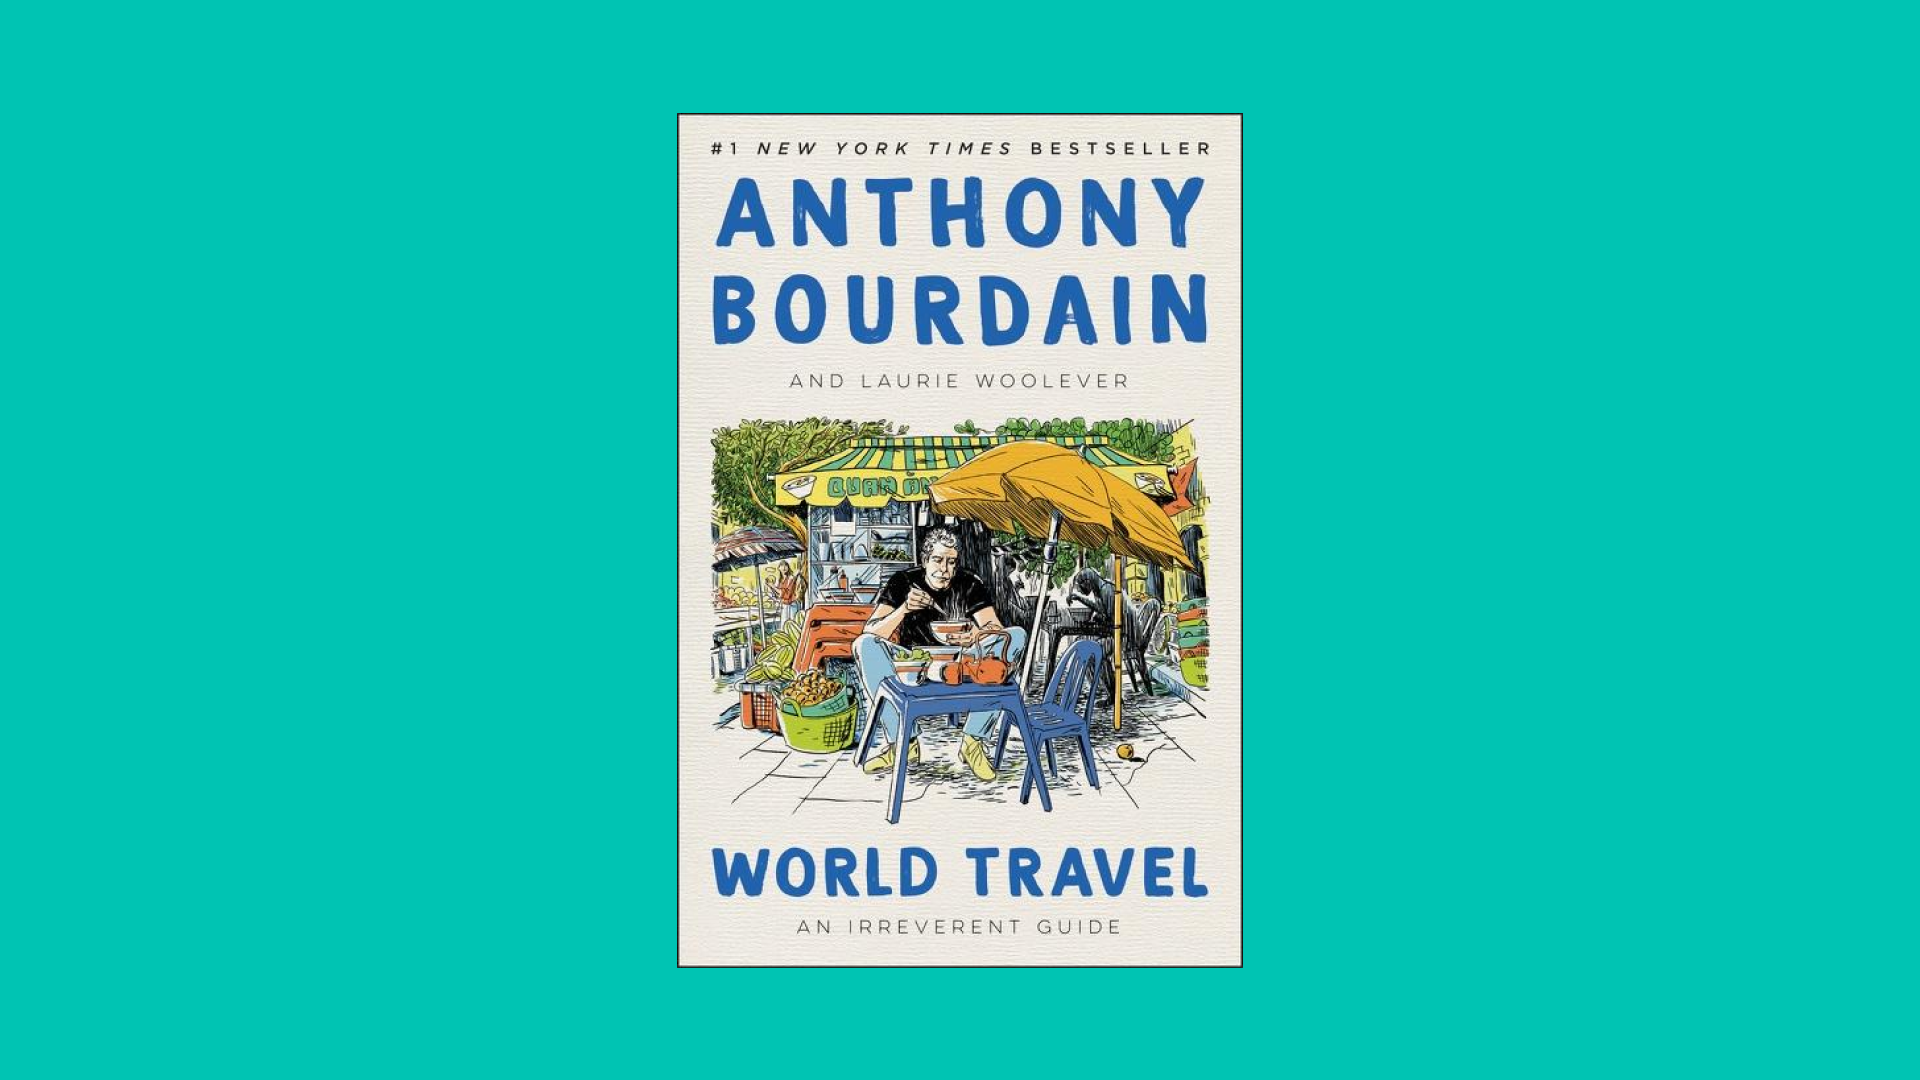 “World Travel” by Anthony Bourdain and Laurie Woolever 